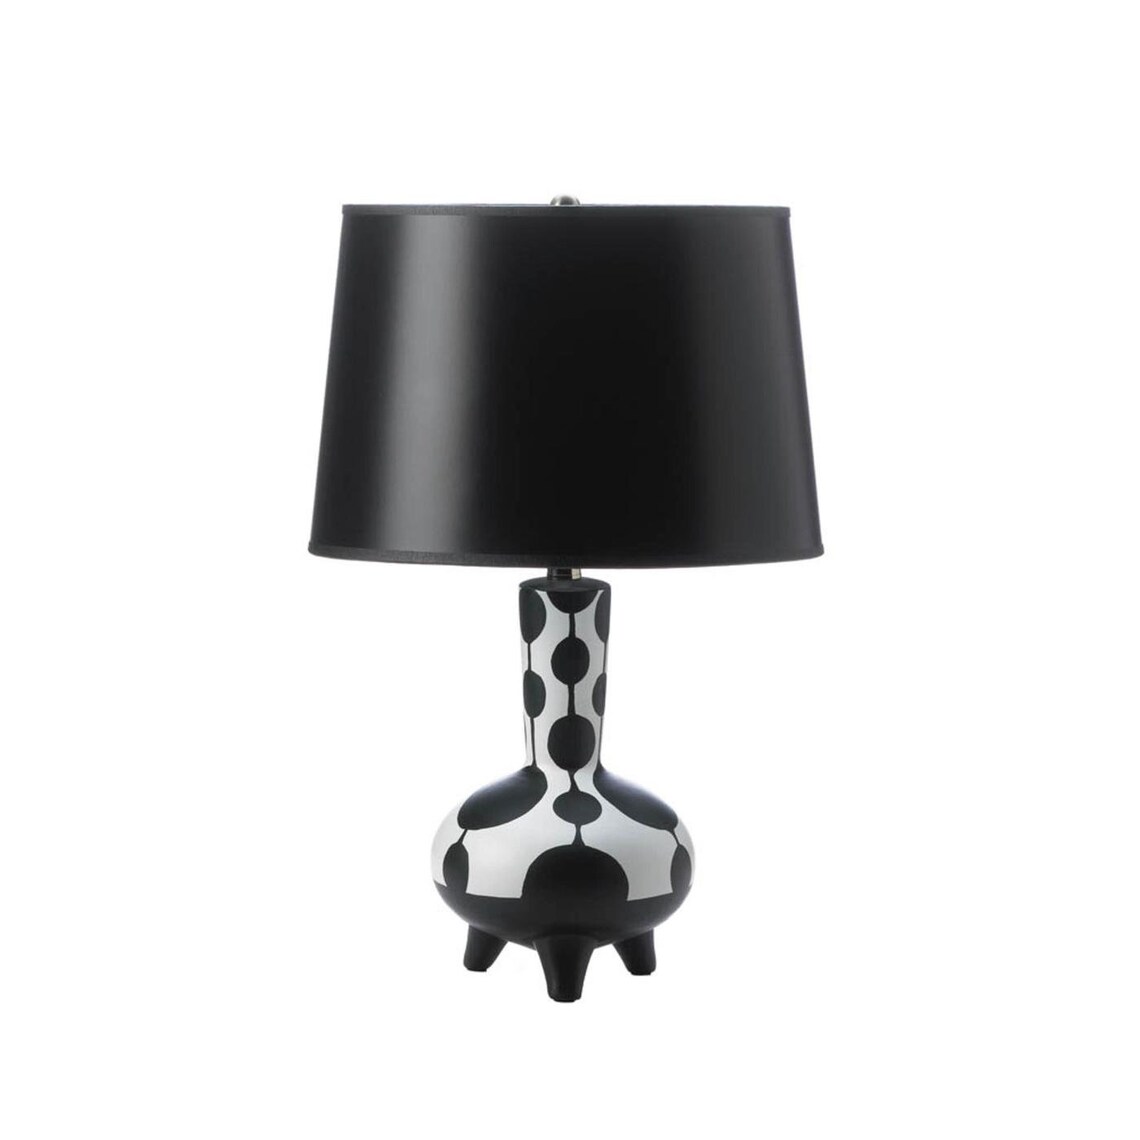 Black And White Table Lamp Etsy